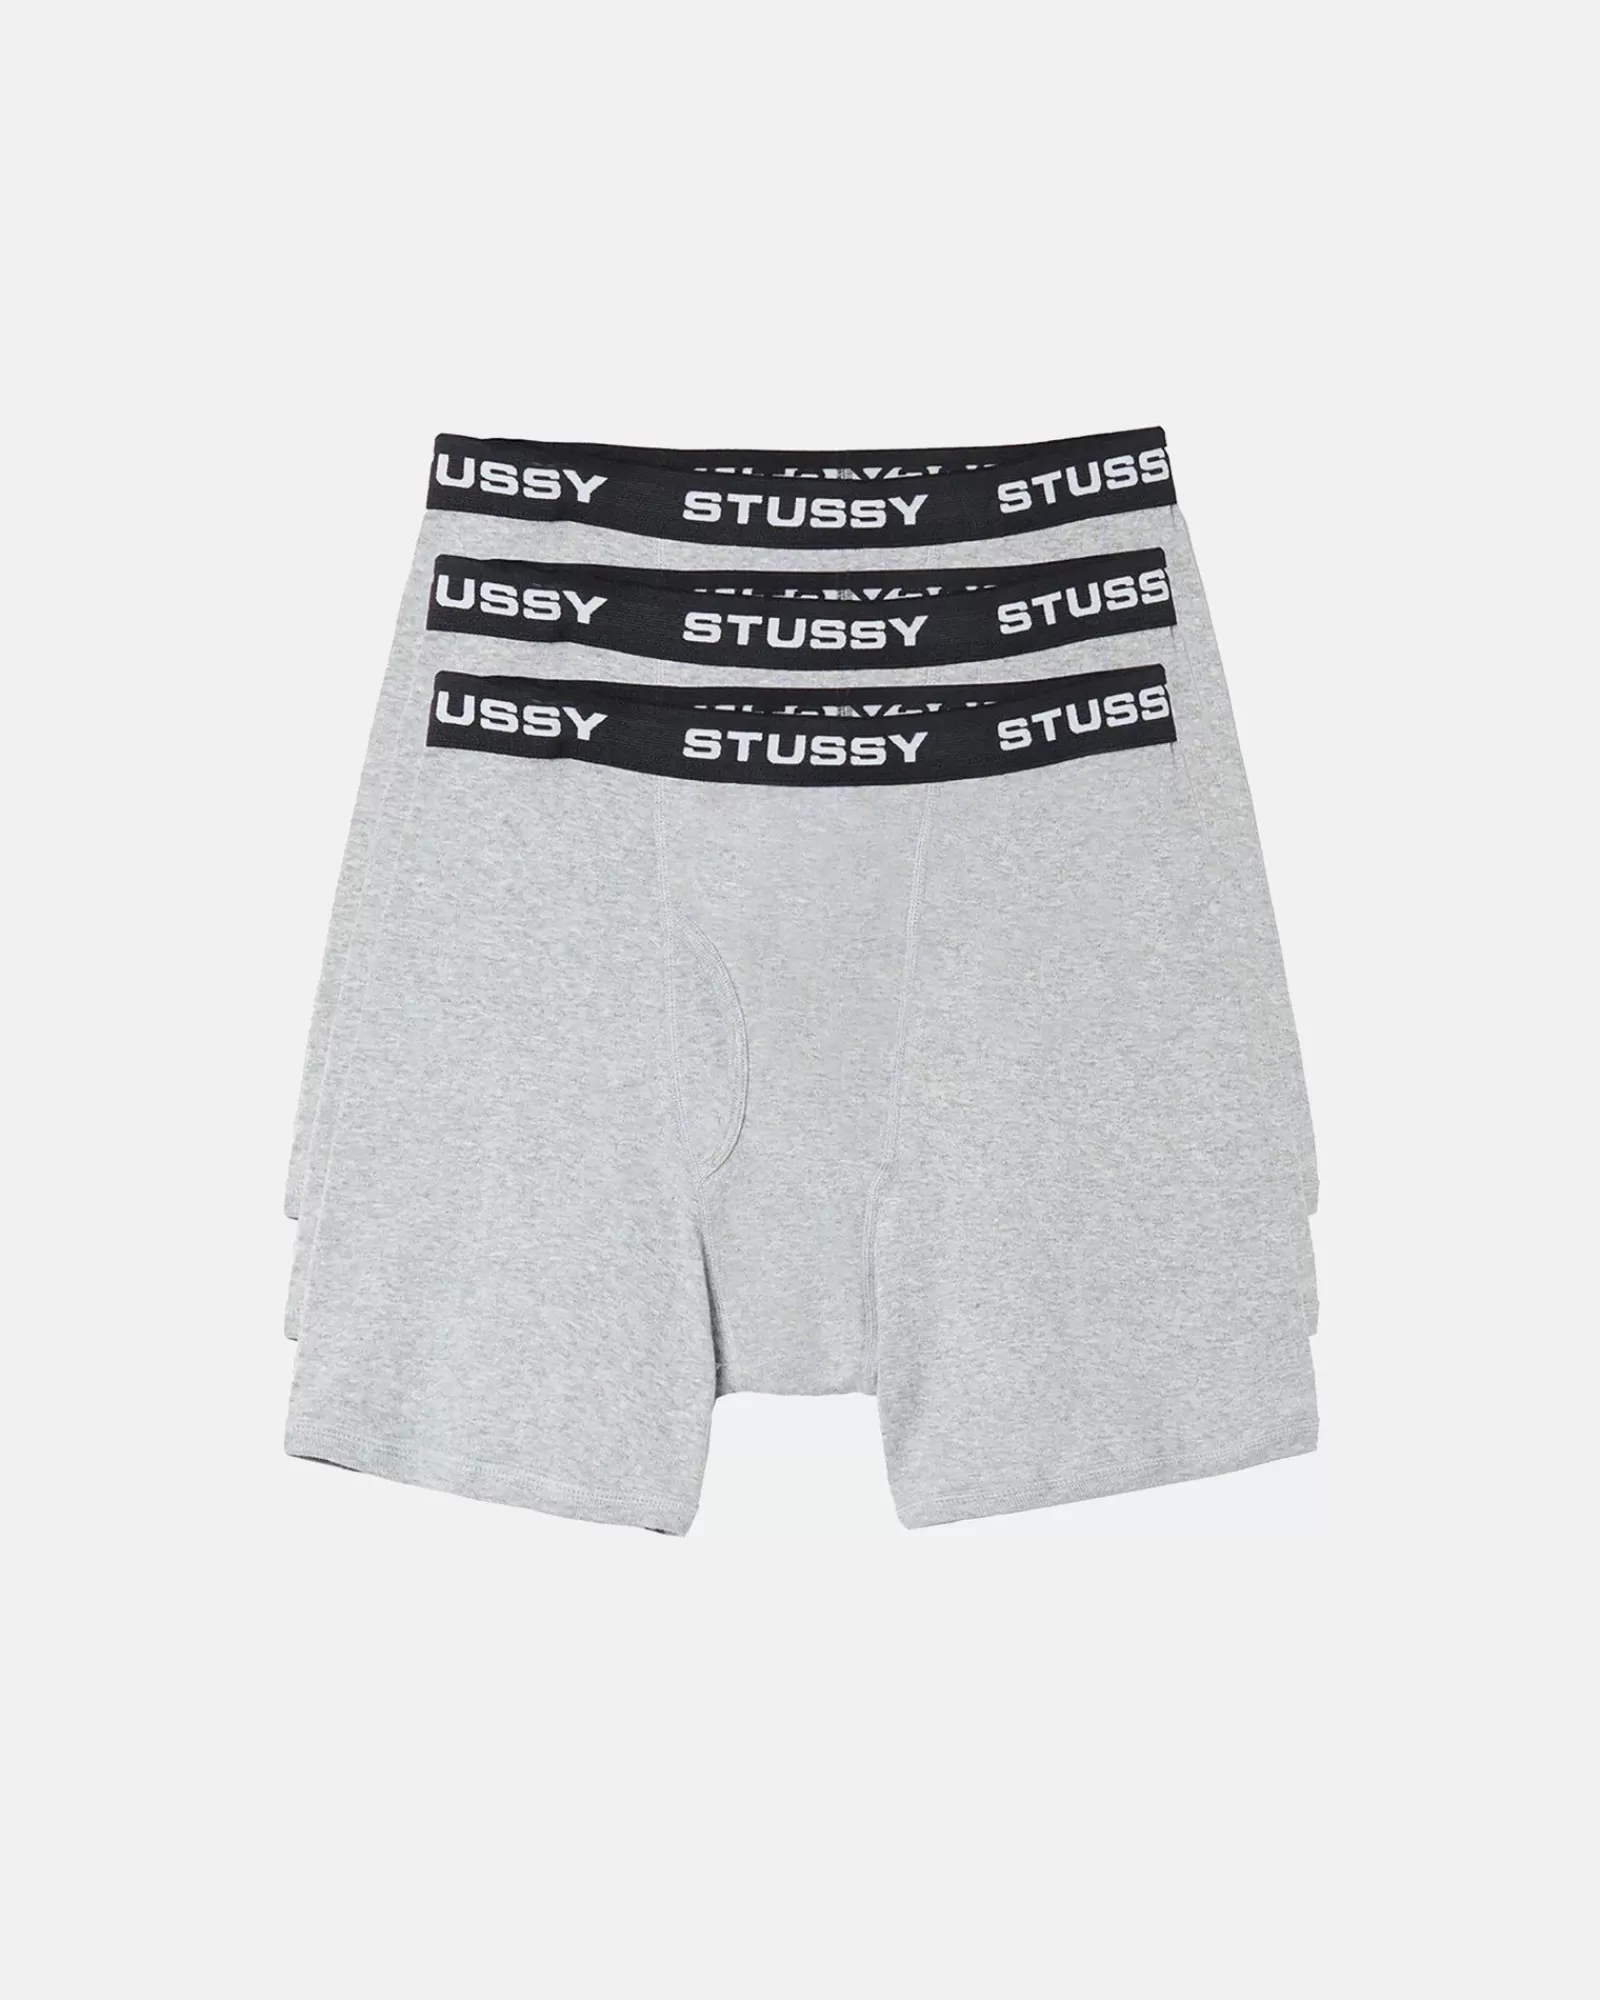 Stüssy Stussy Boxer Briefs Multipack Discount